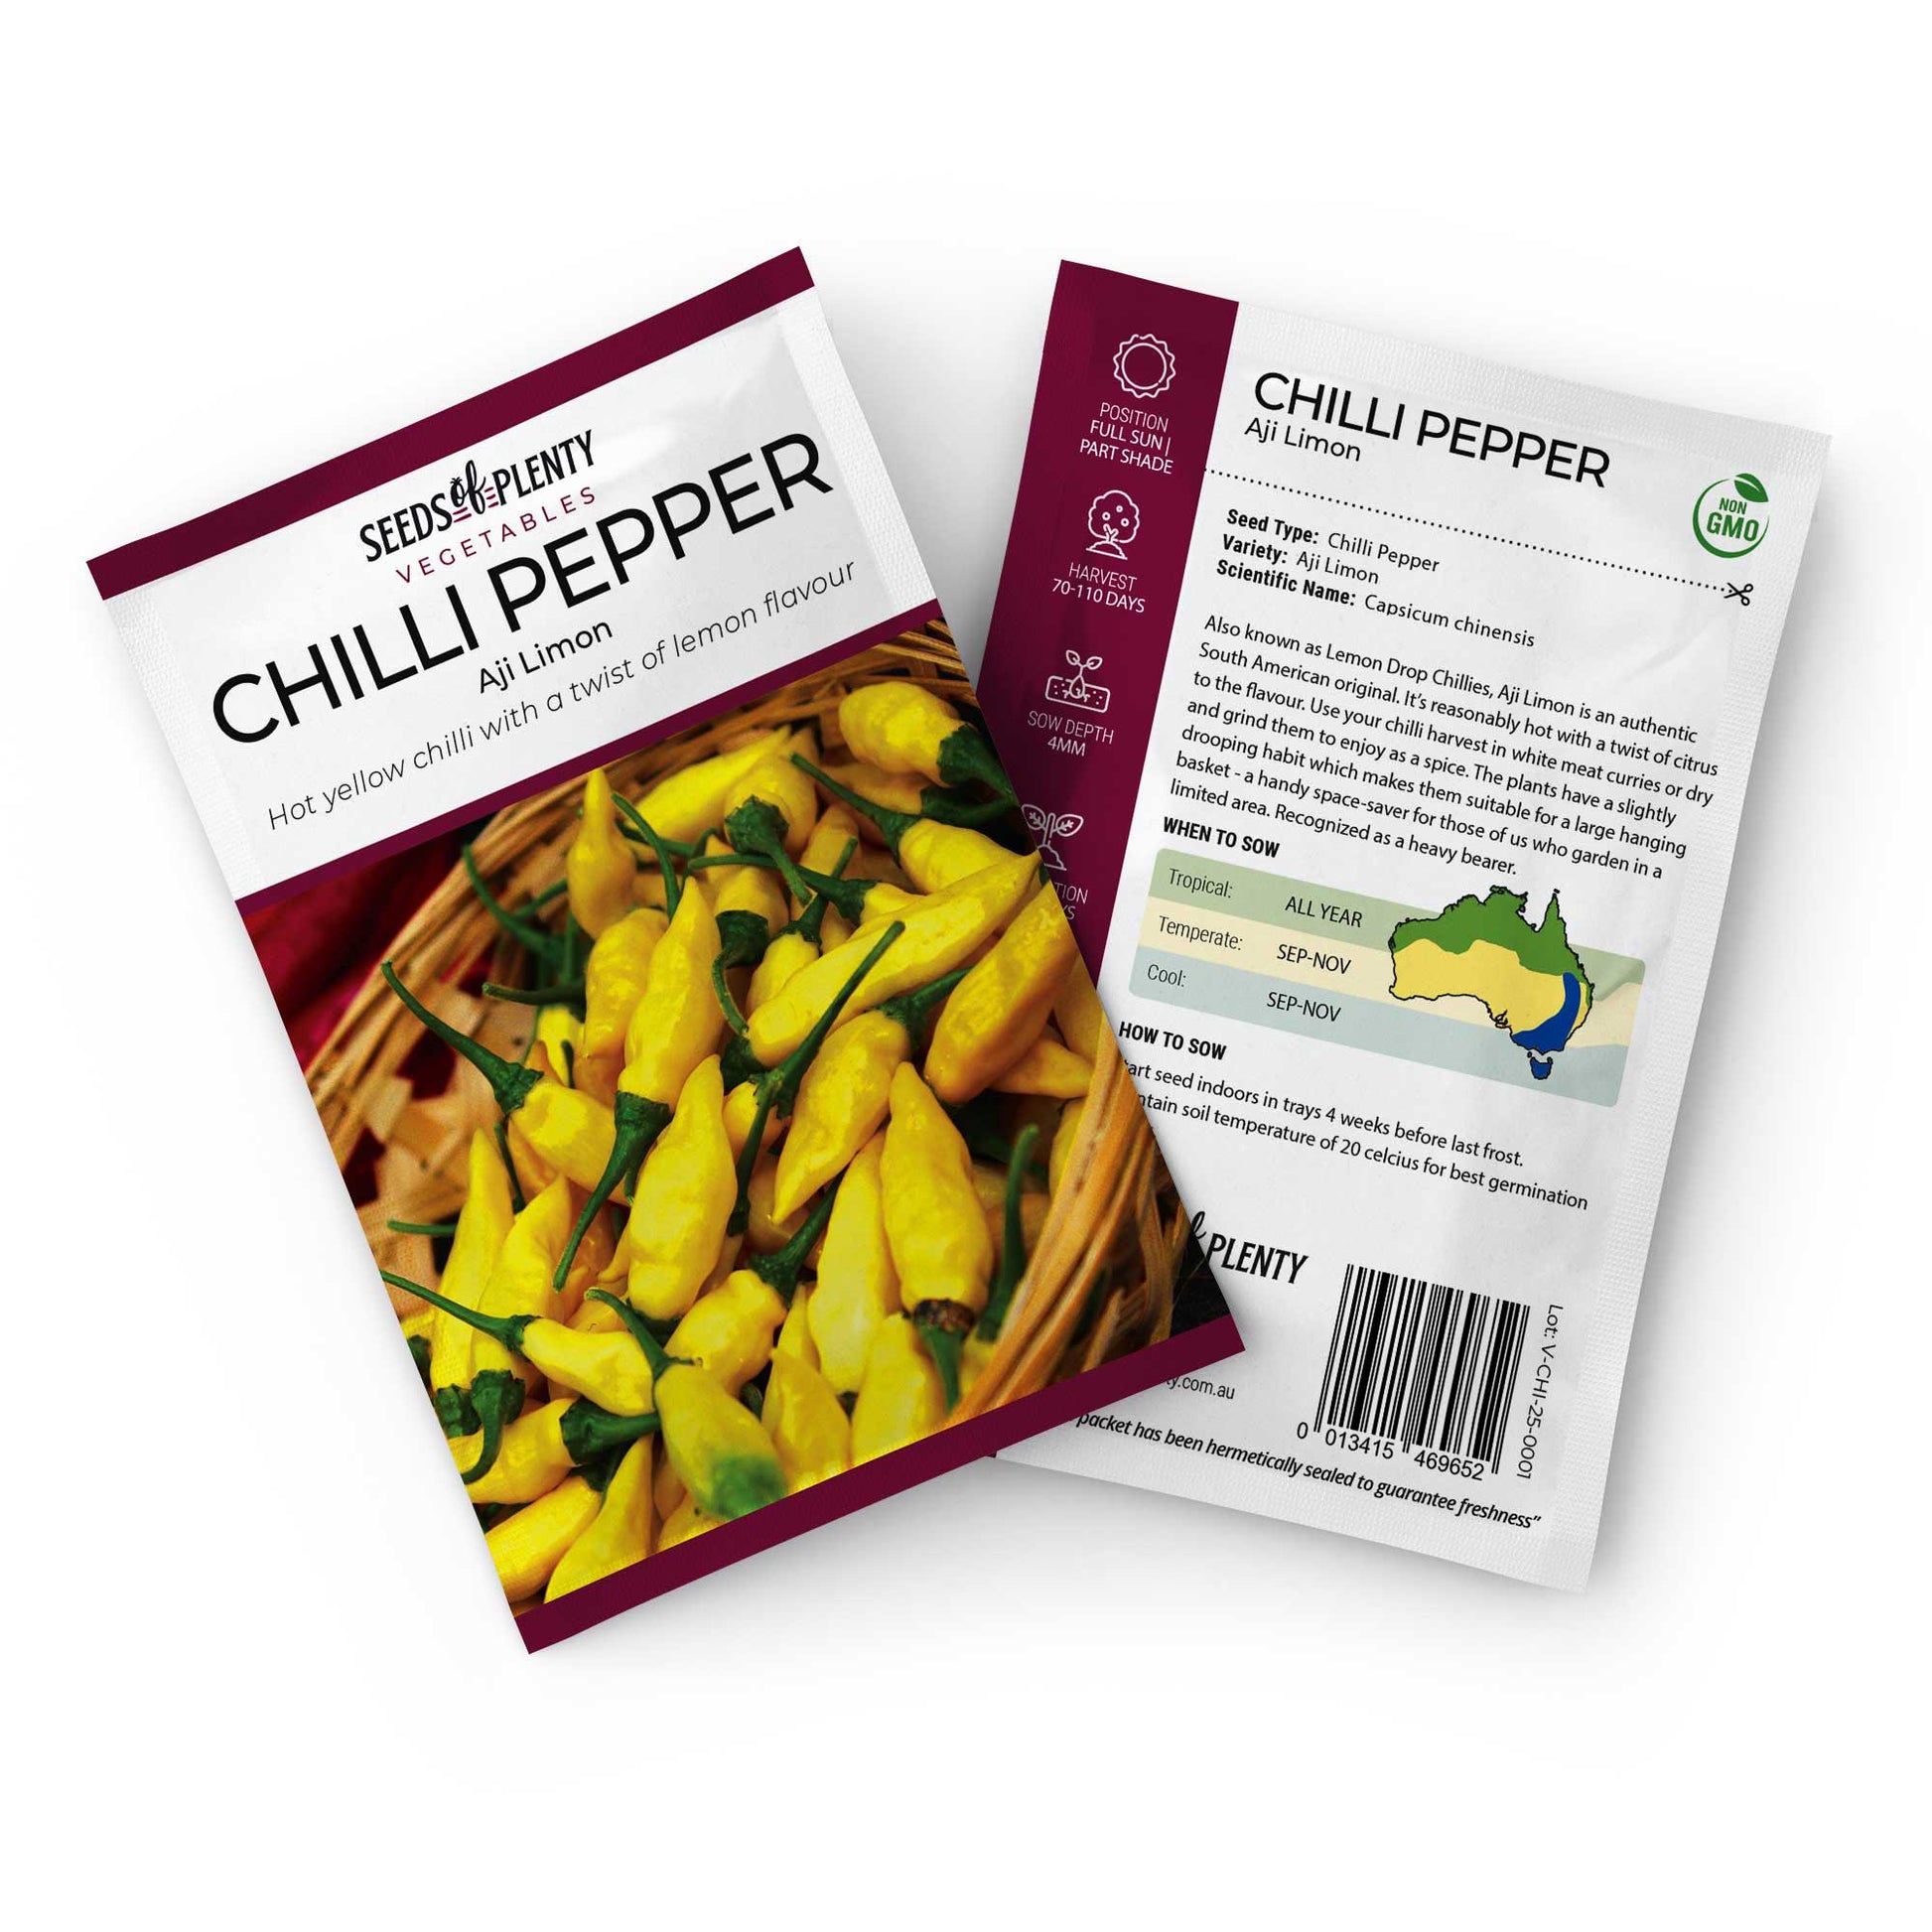 CHILLI PEPPER - Aji Limon Seed Packet - Capsicum chinensis